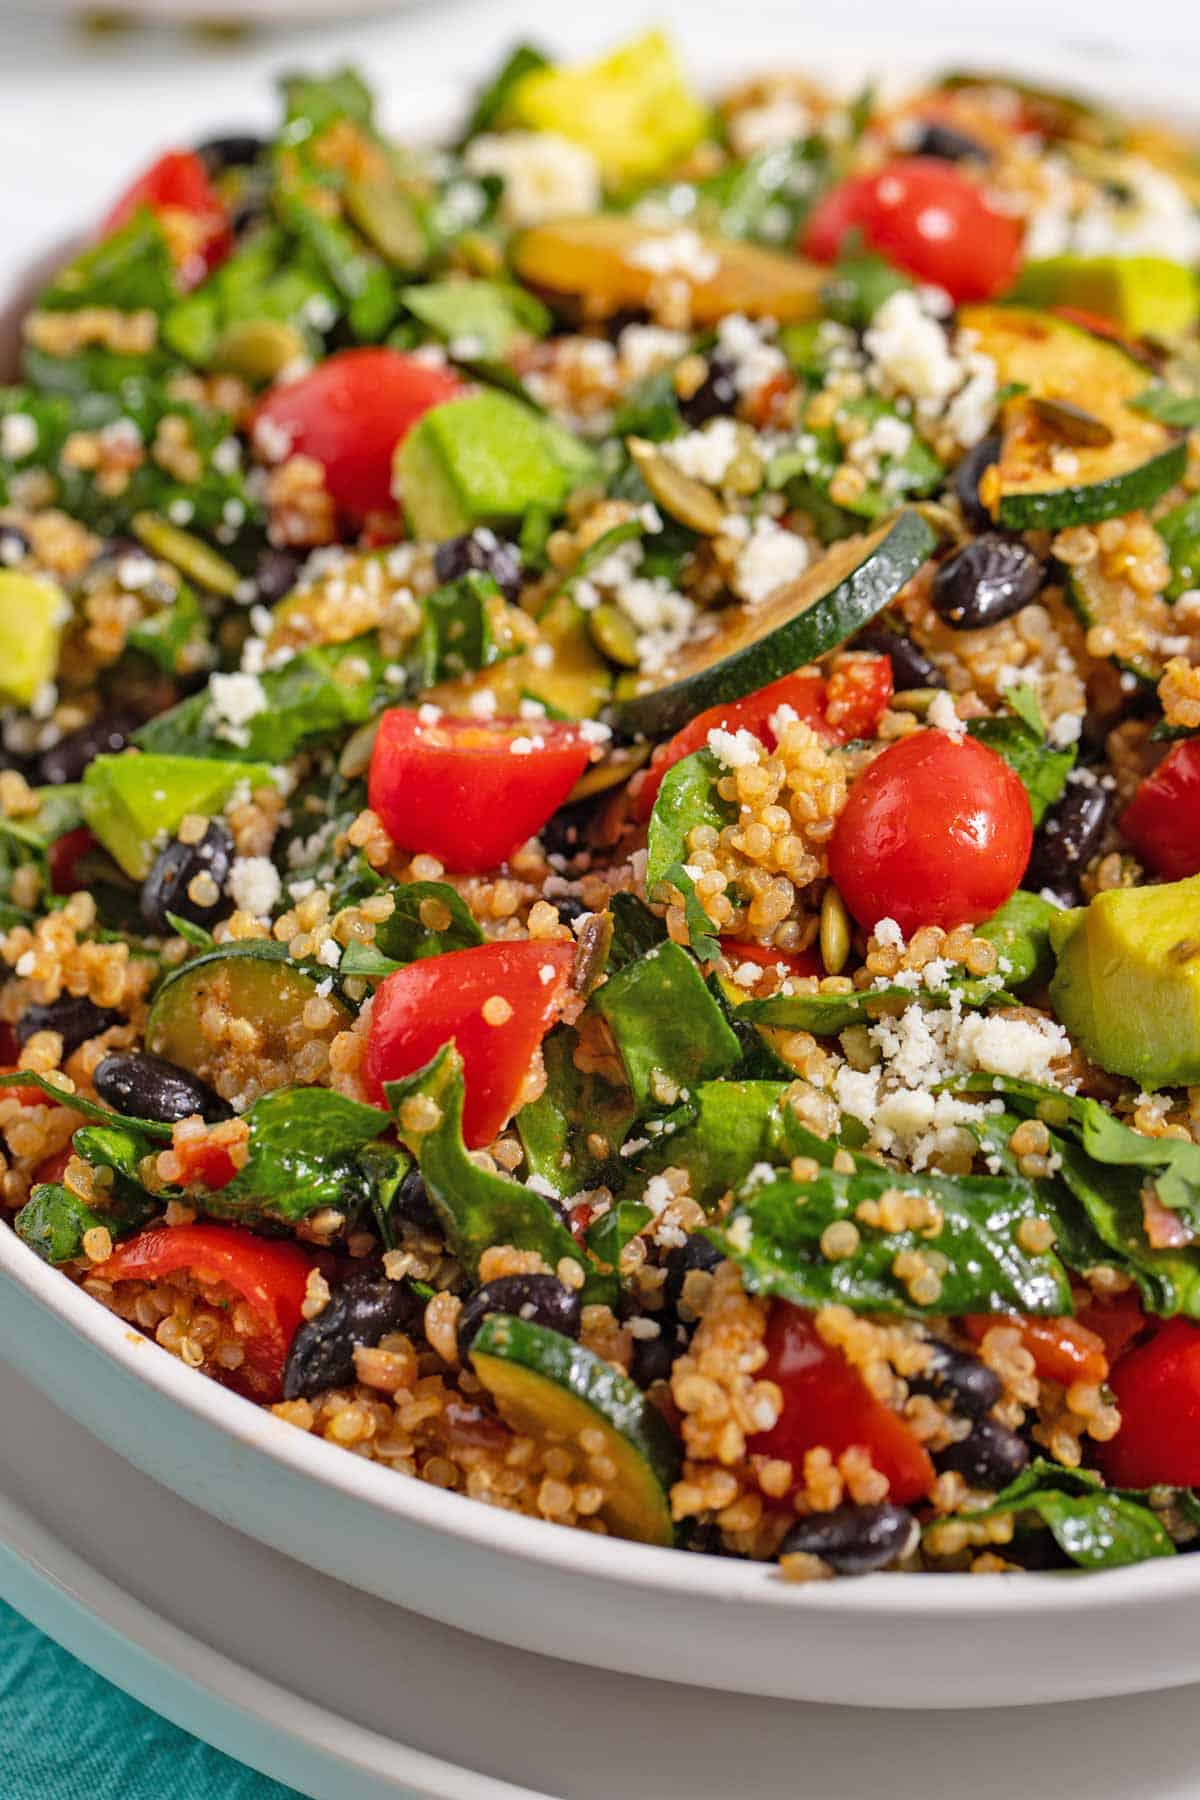 Quinoa black bean salad in a bowl with tomatoes, avocado, and zucchini.